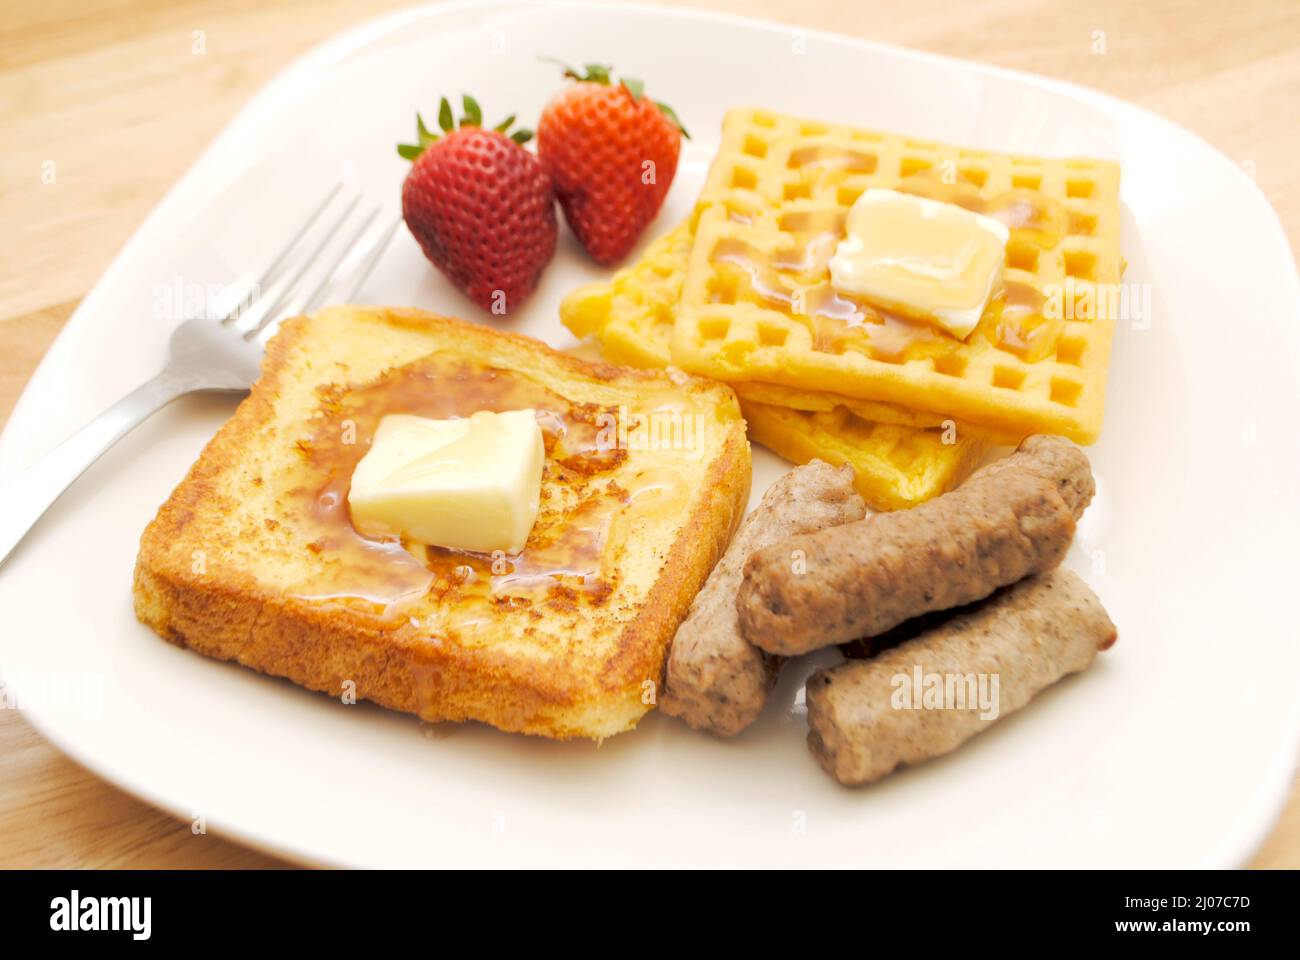 French Toast, Waffles and Two Pork Sausage Links on a White Plate Stock Photo